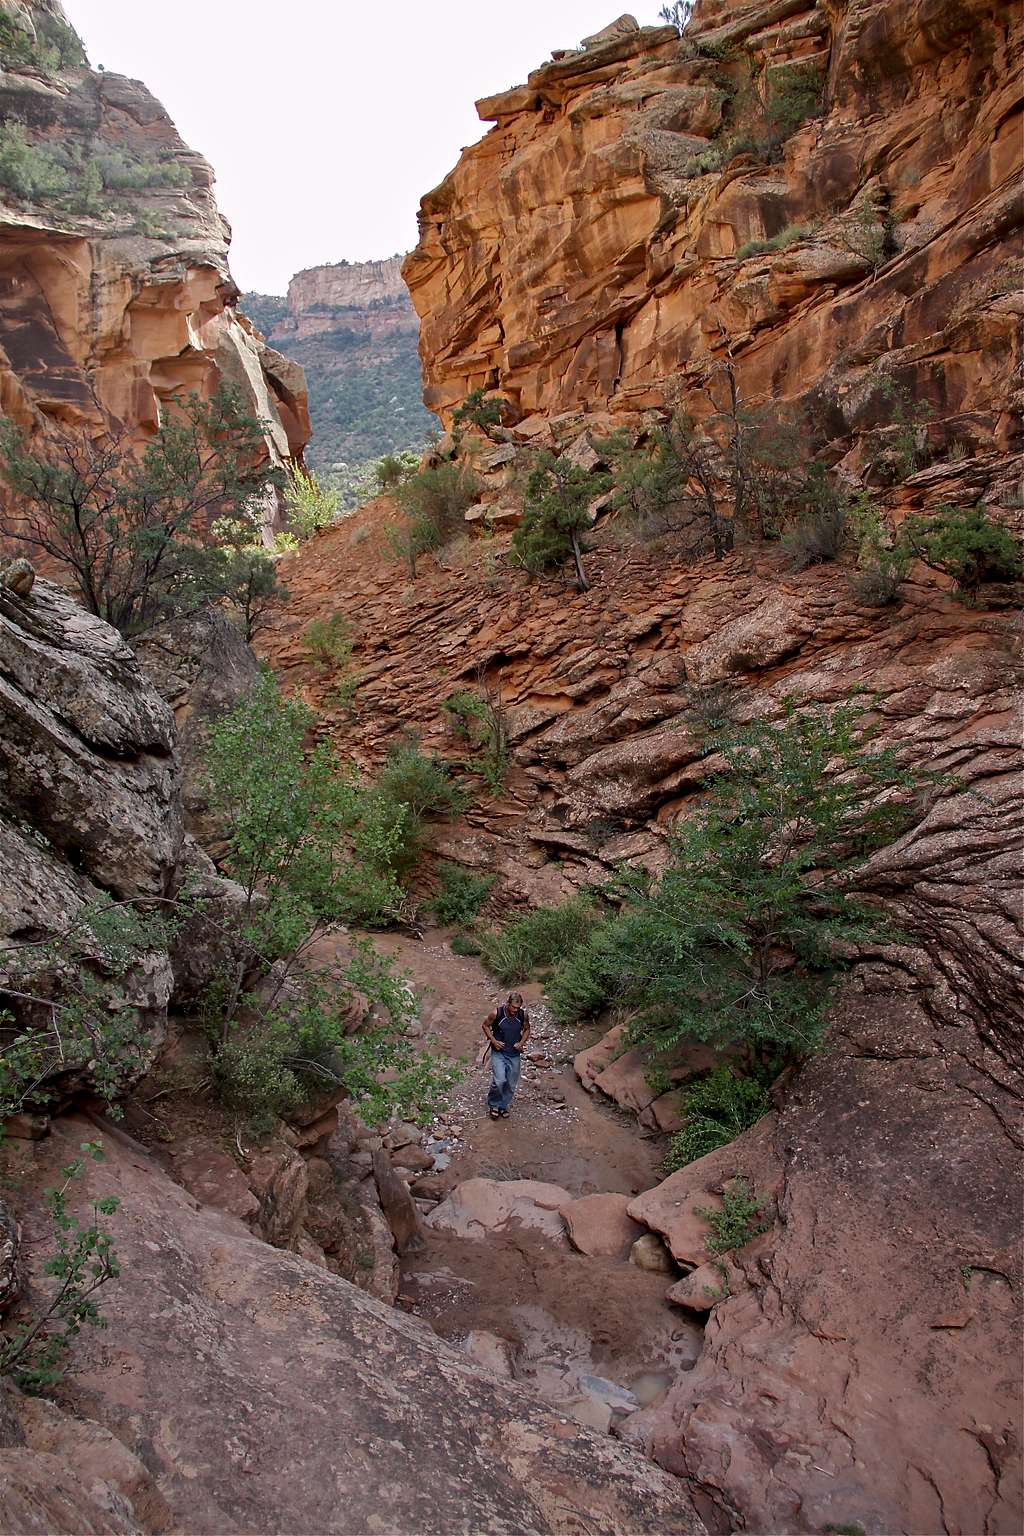 Scenery of Rough Canyon